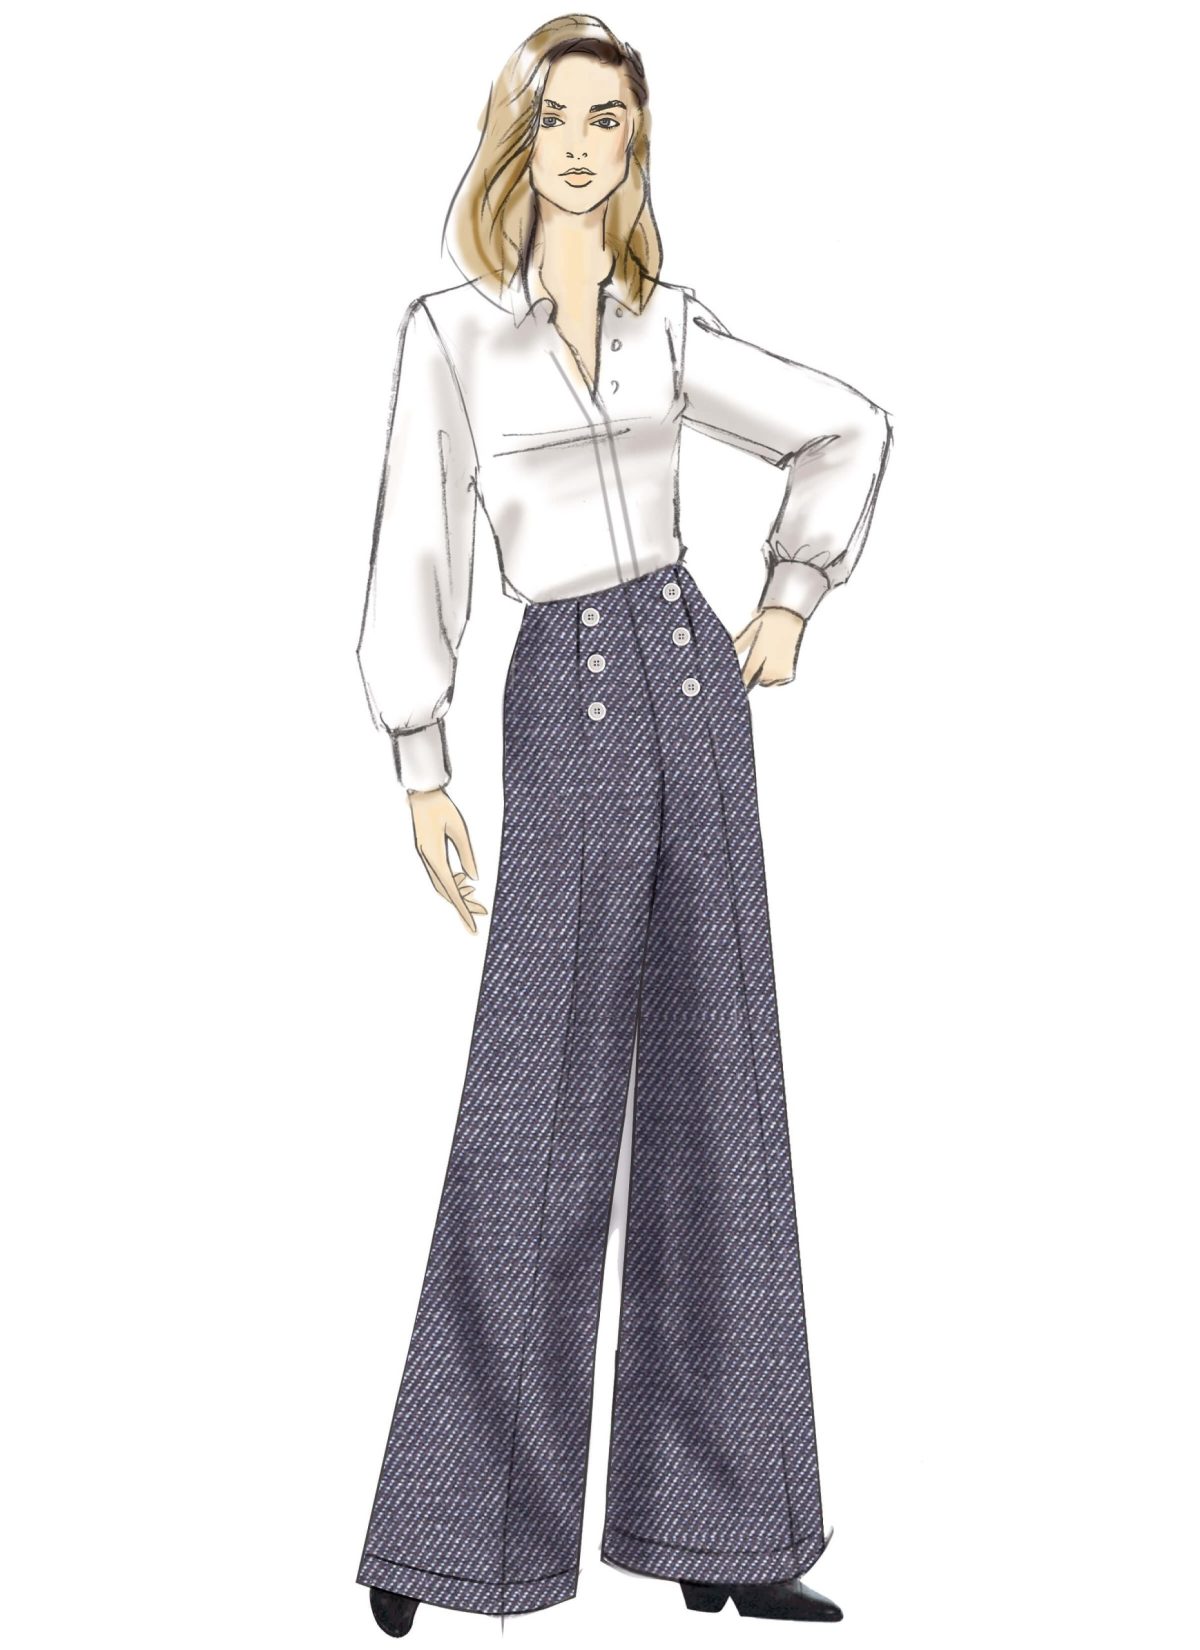 Vogue Patterns V9282 Misses' High-Waisted Pants with Button Detail